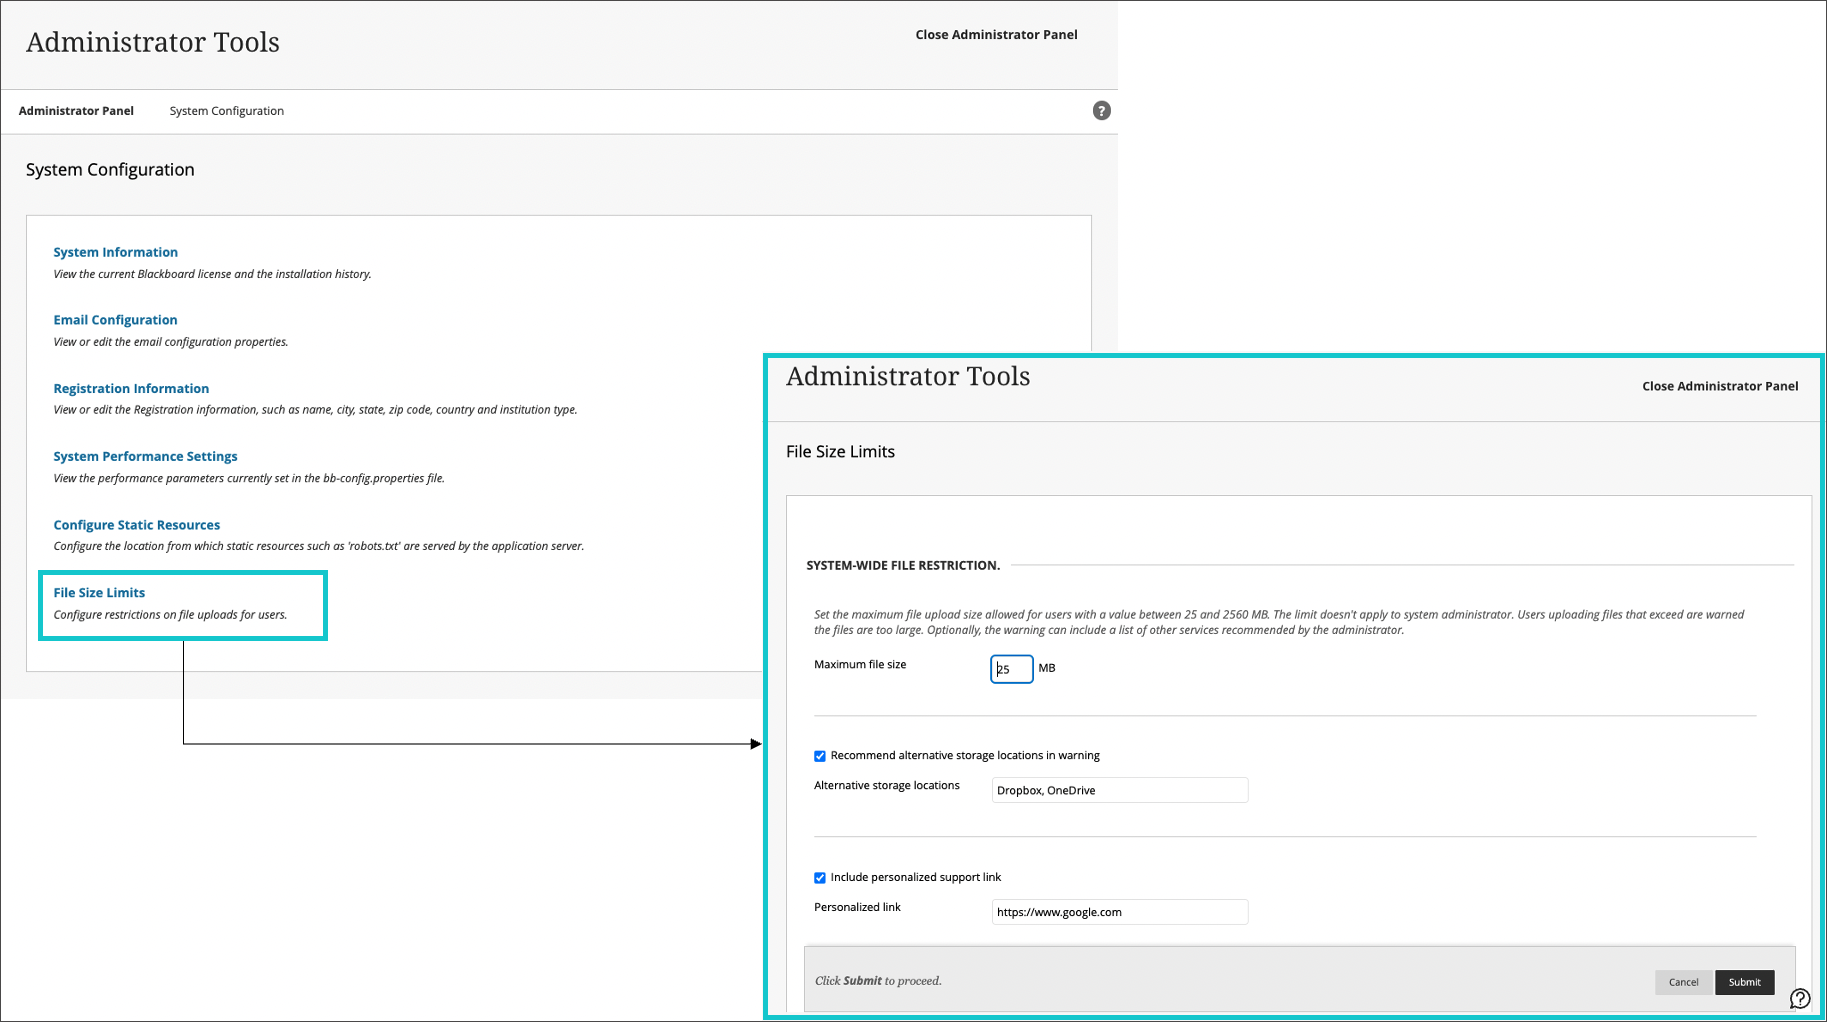 Administrator flow for maximum file size settings, alternative storage, and support link page